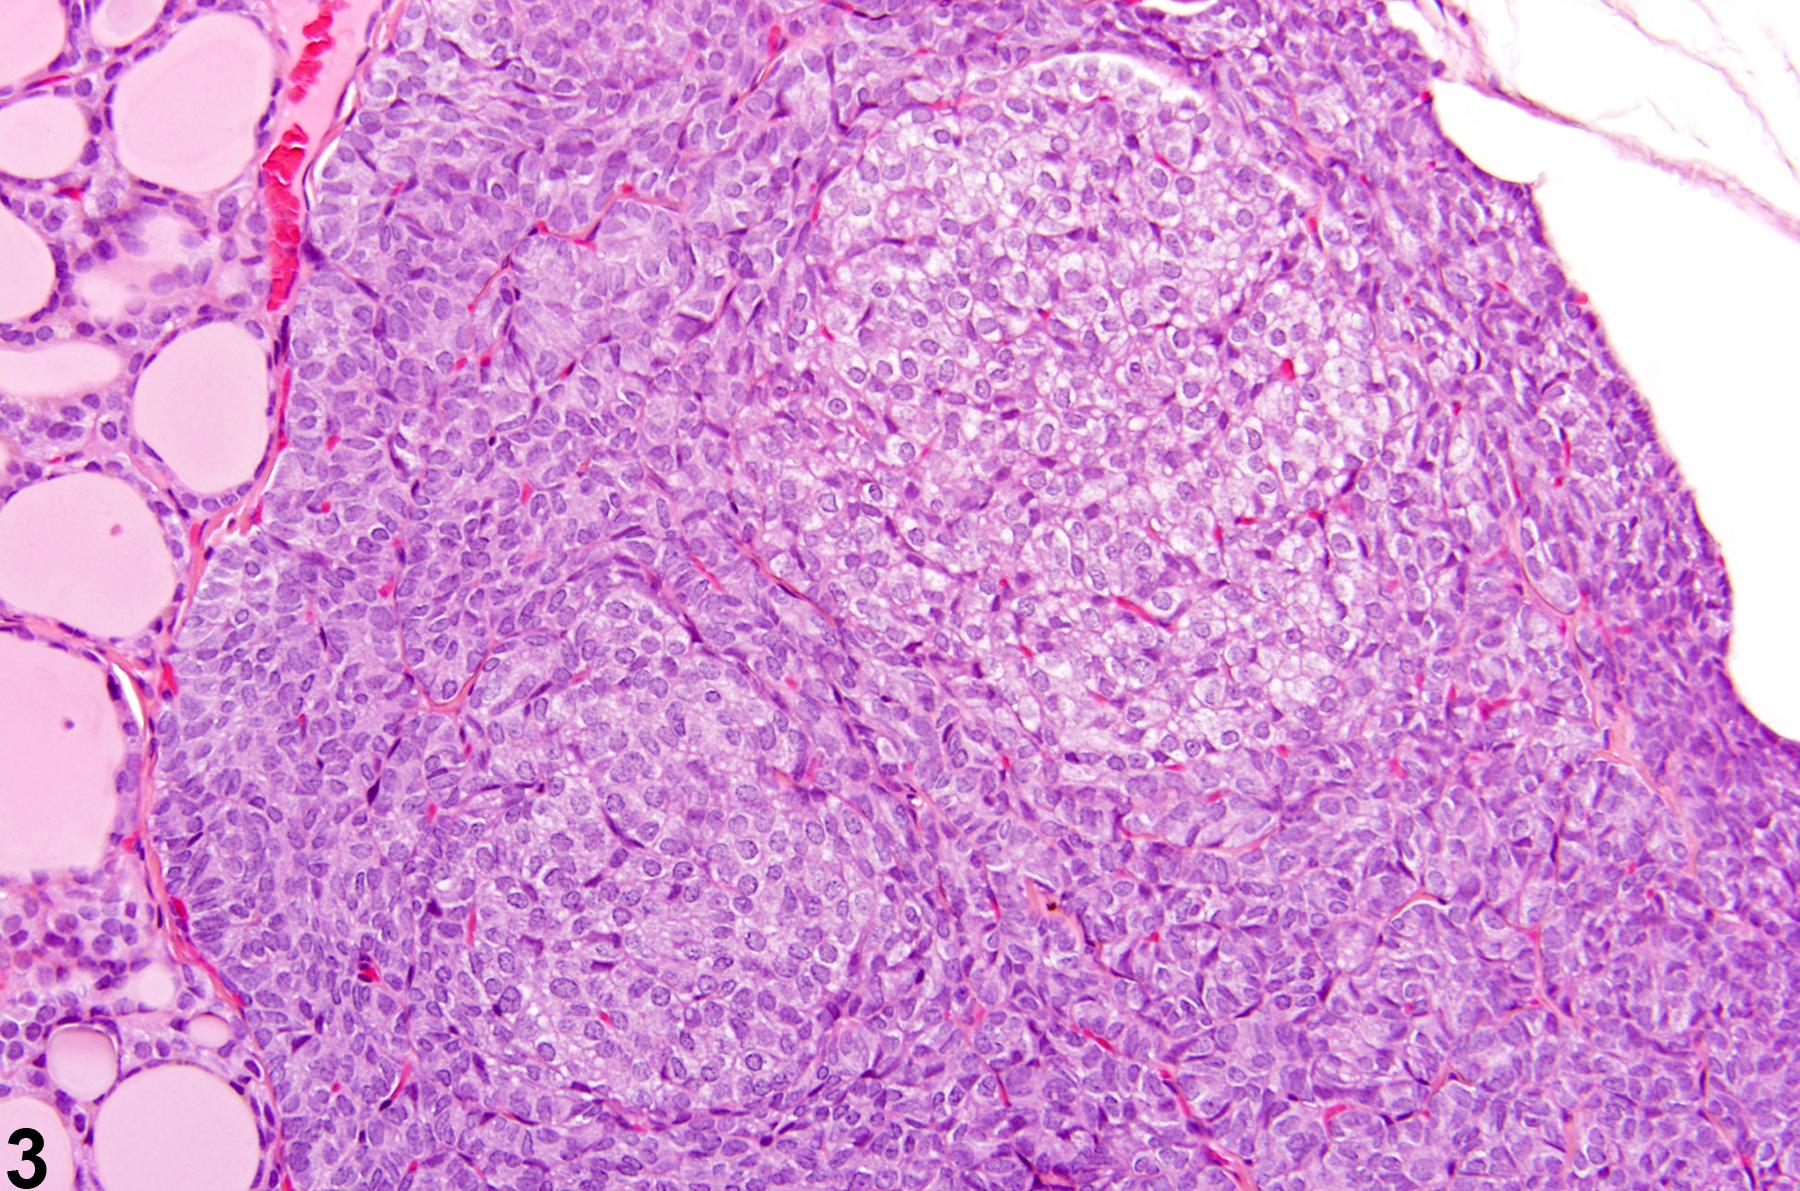 Image of hyperplasia, focal in the parathyroid gland from a male Wistar Han rat in a chronic study